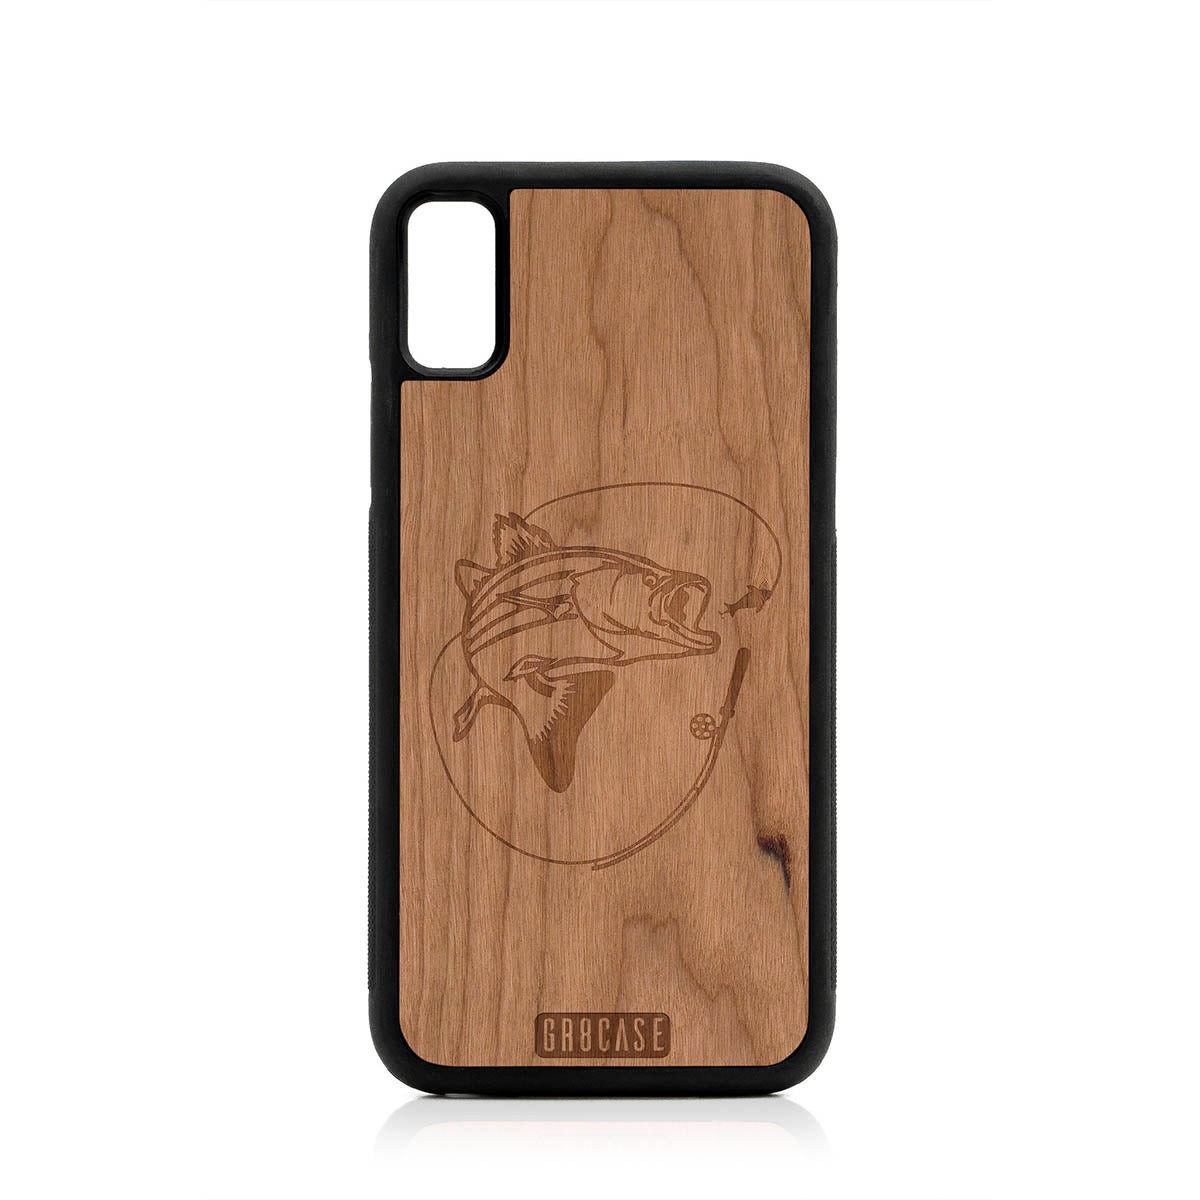 Fish and Reel Design Wood Case For iPhone X/XS by GR8CASE